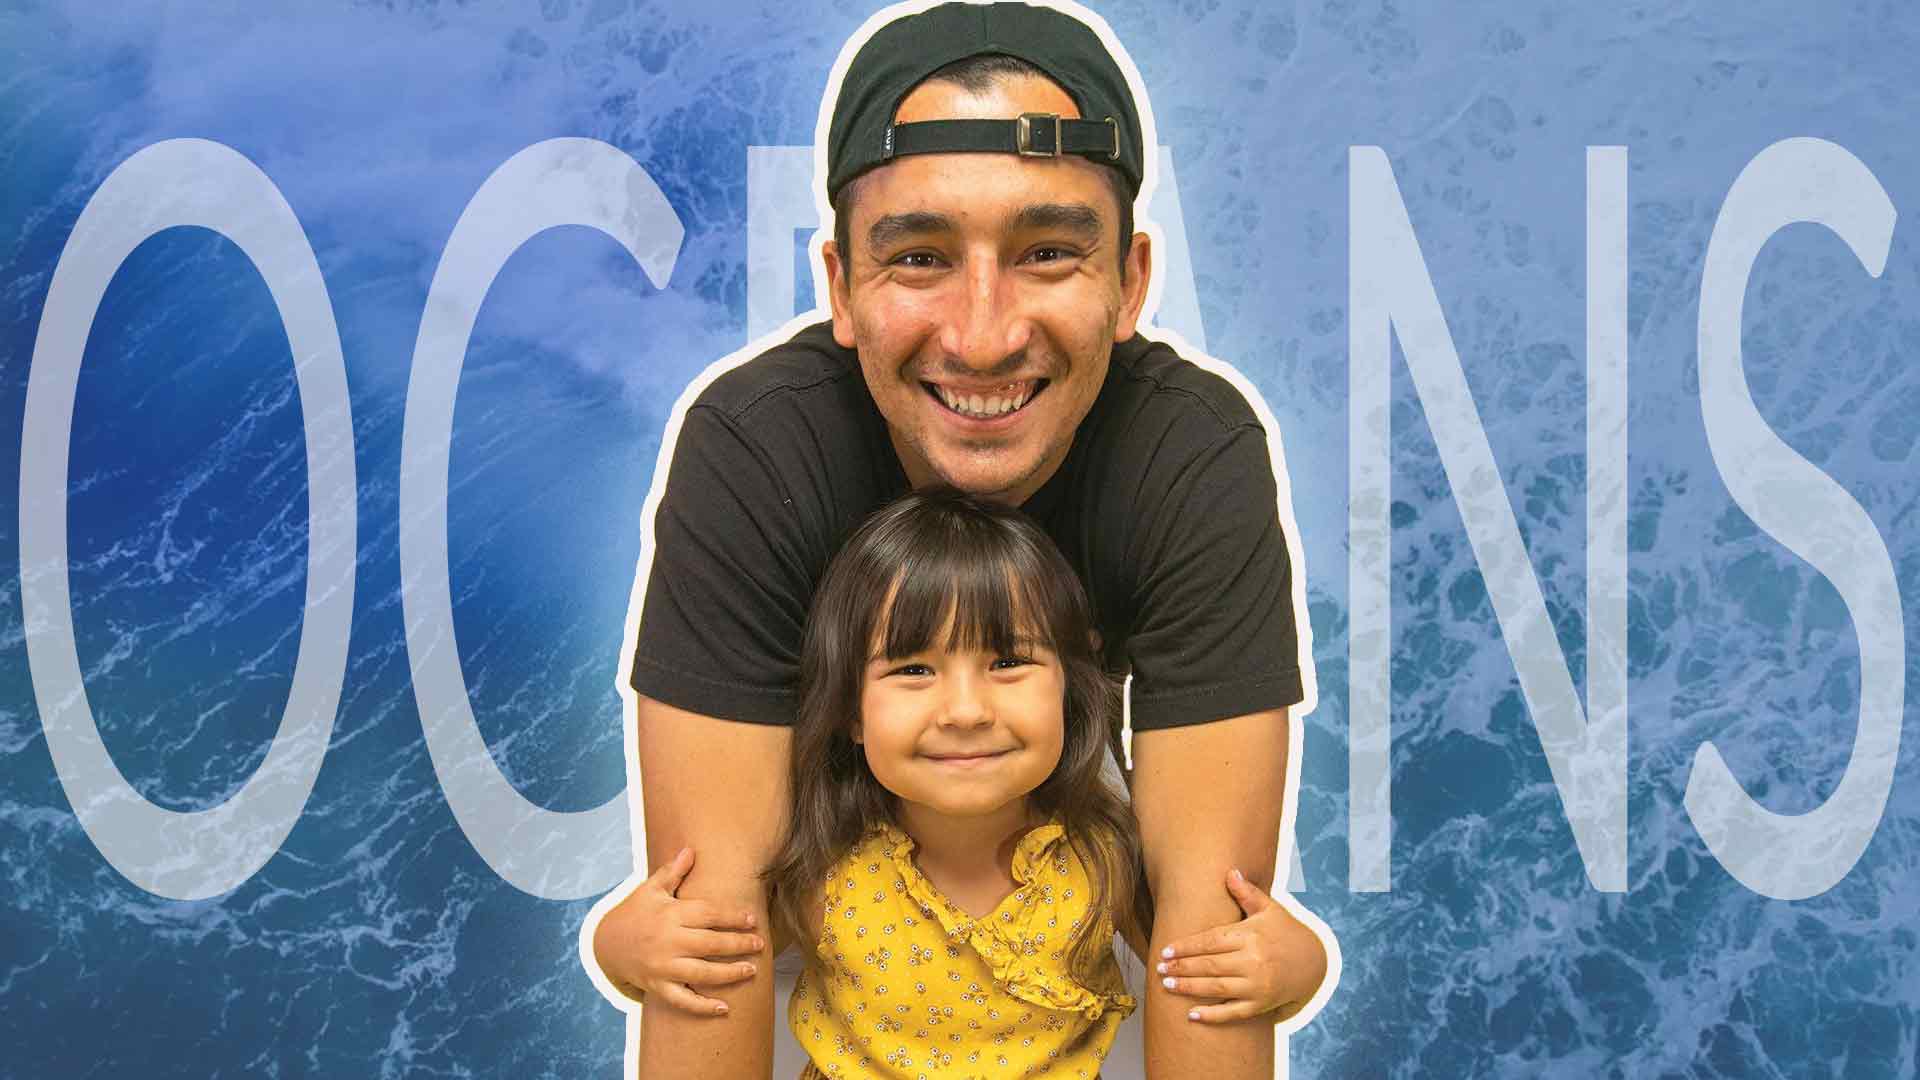 Father and Daughter - Nick and Sienna stand together in front of an ocean background